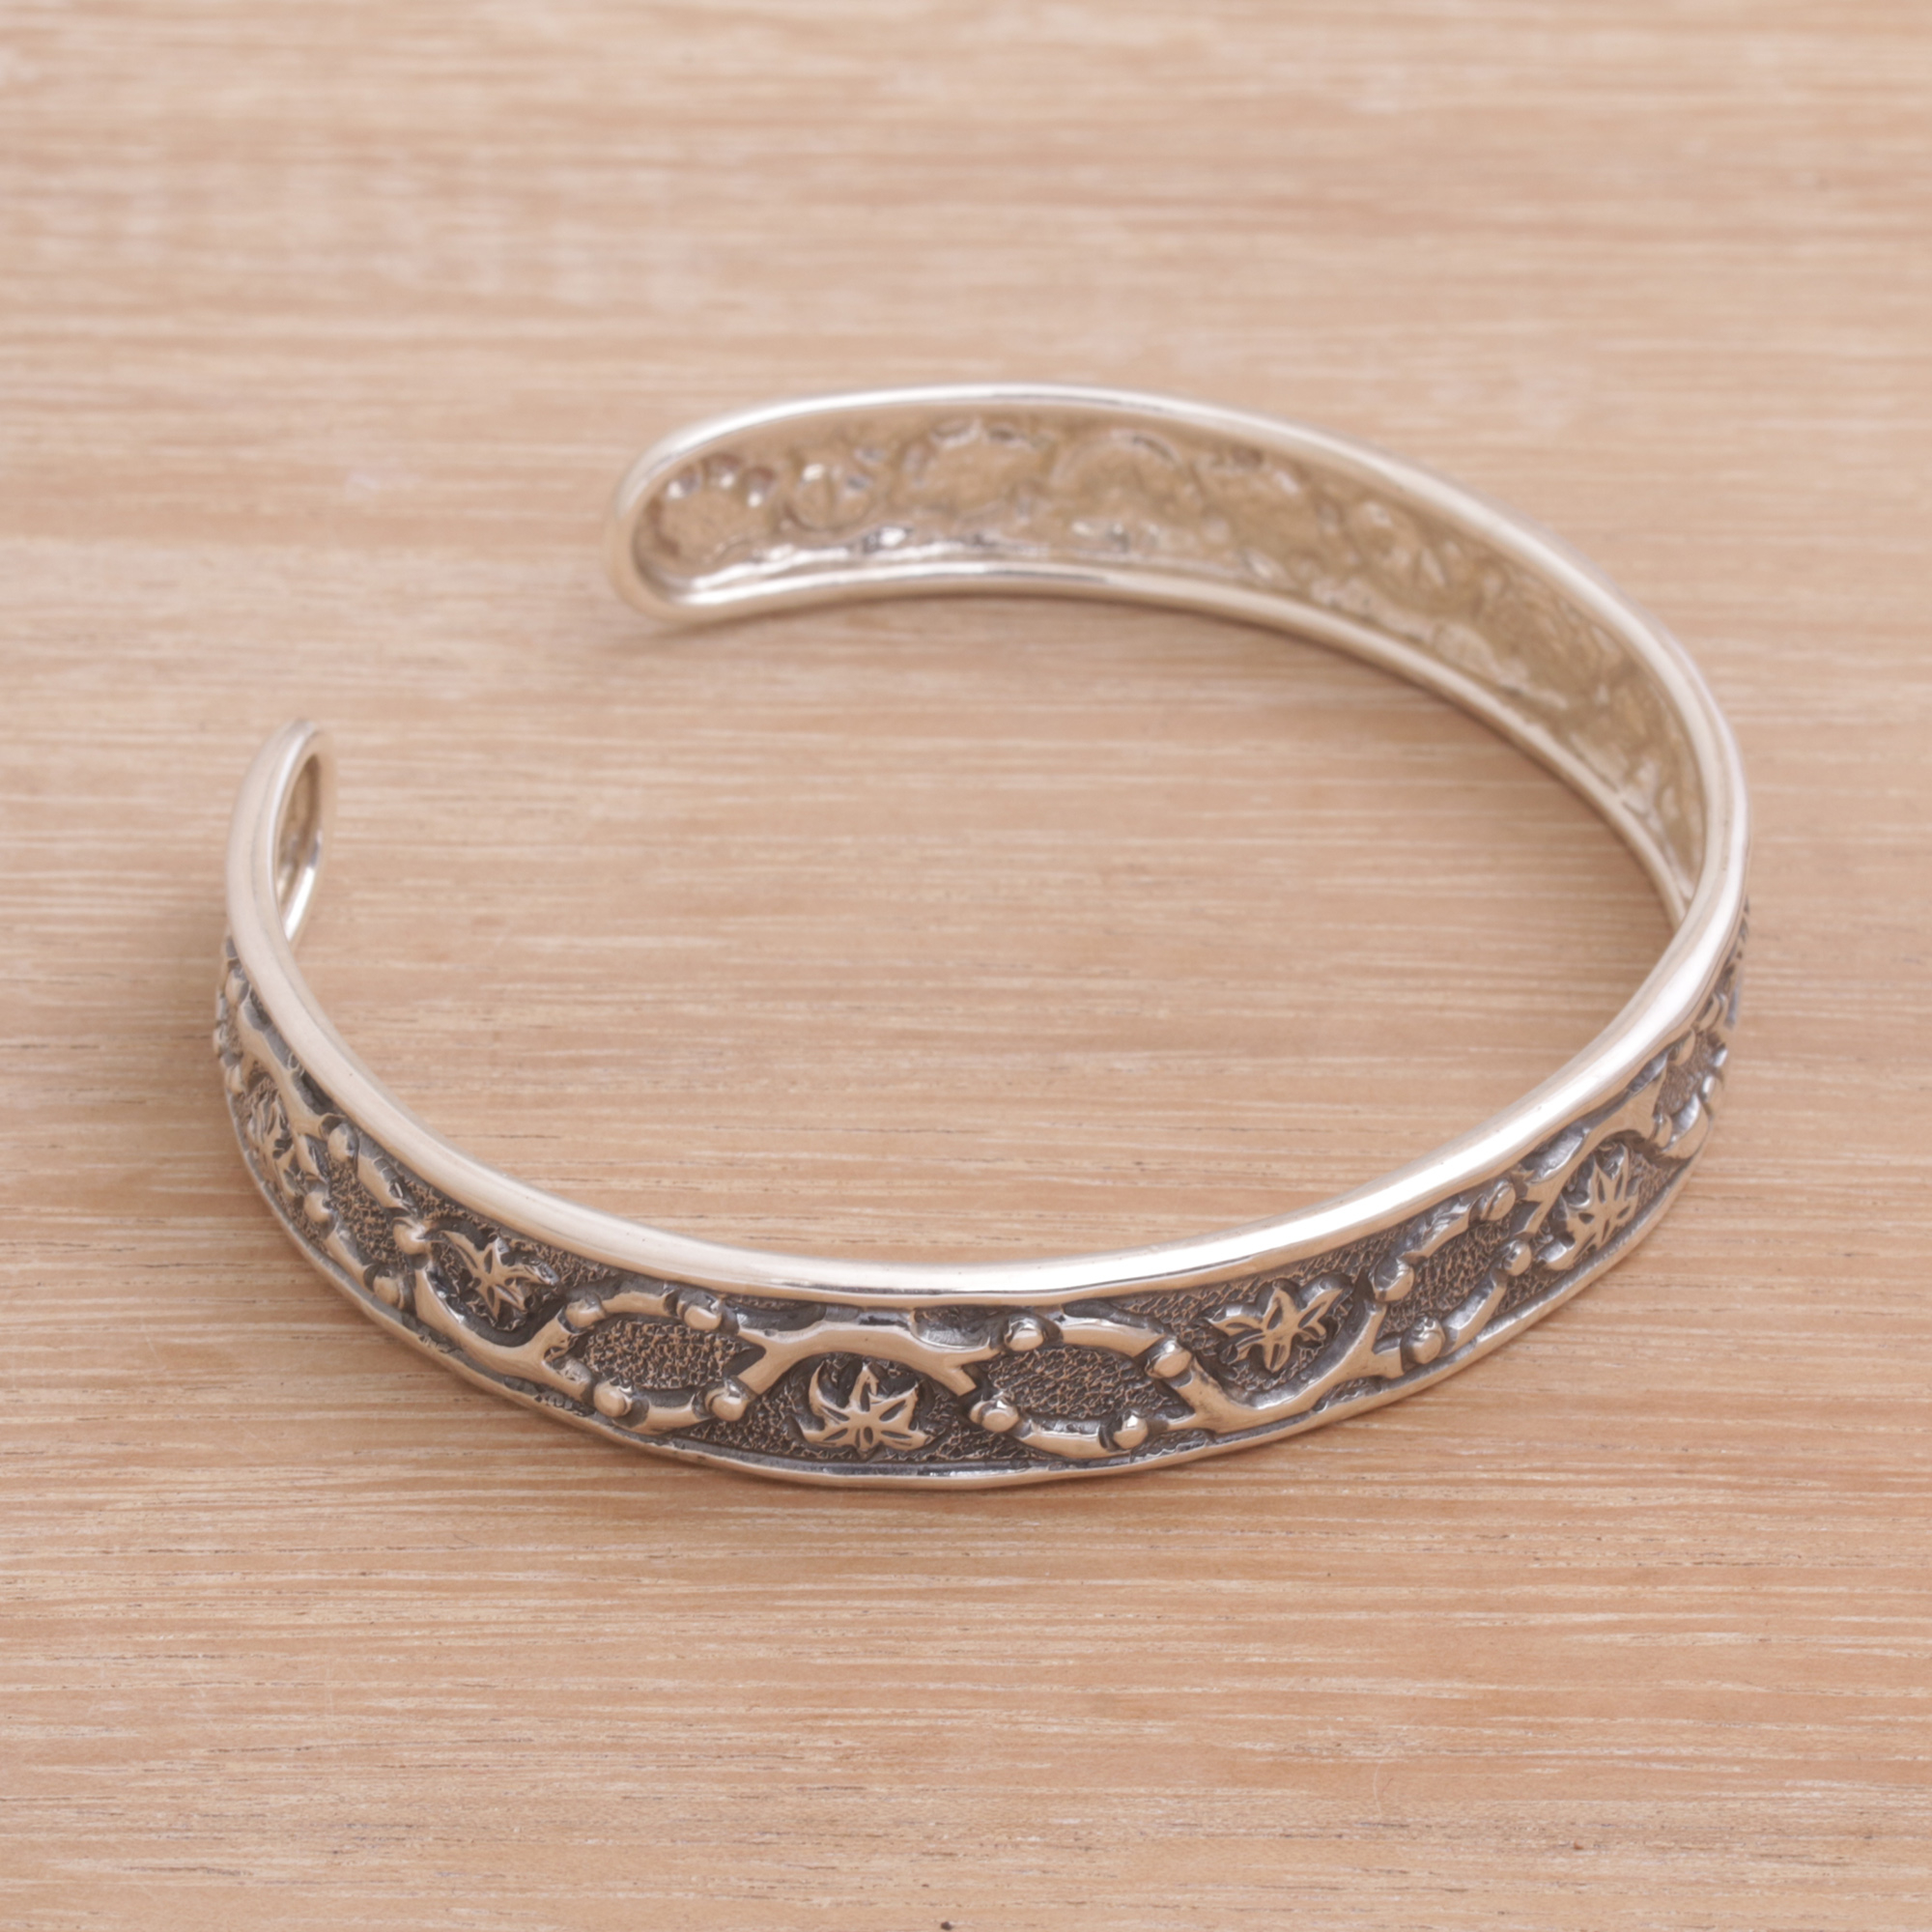 925 Sterling Silver Bamboo Cuff Bracelet from Indonesia - Bamboo Parade ...